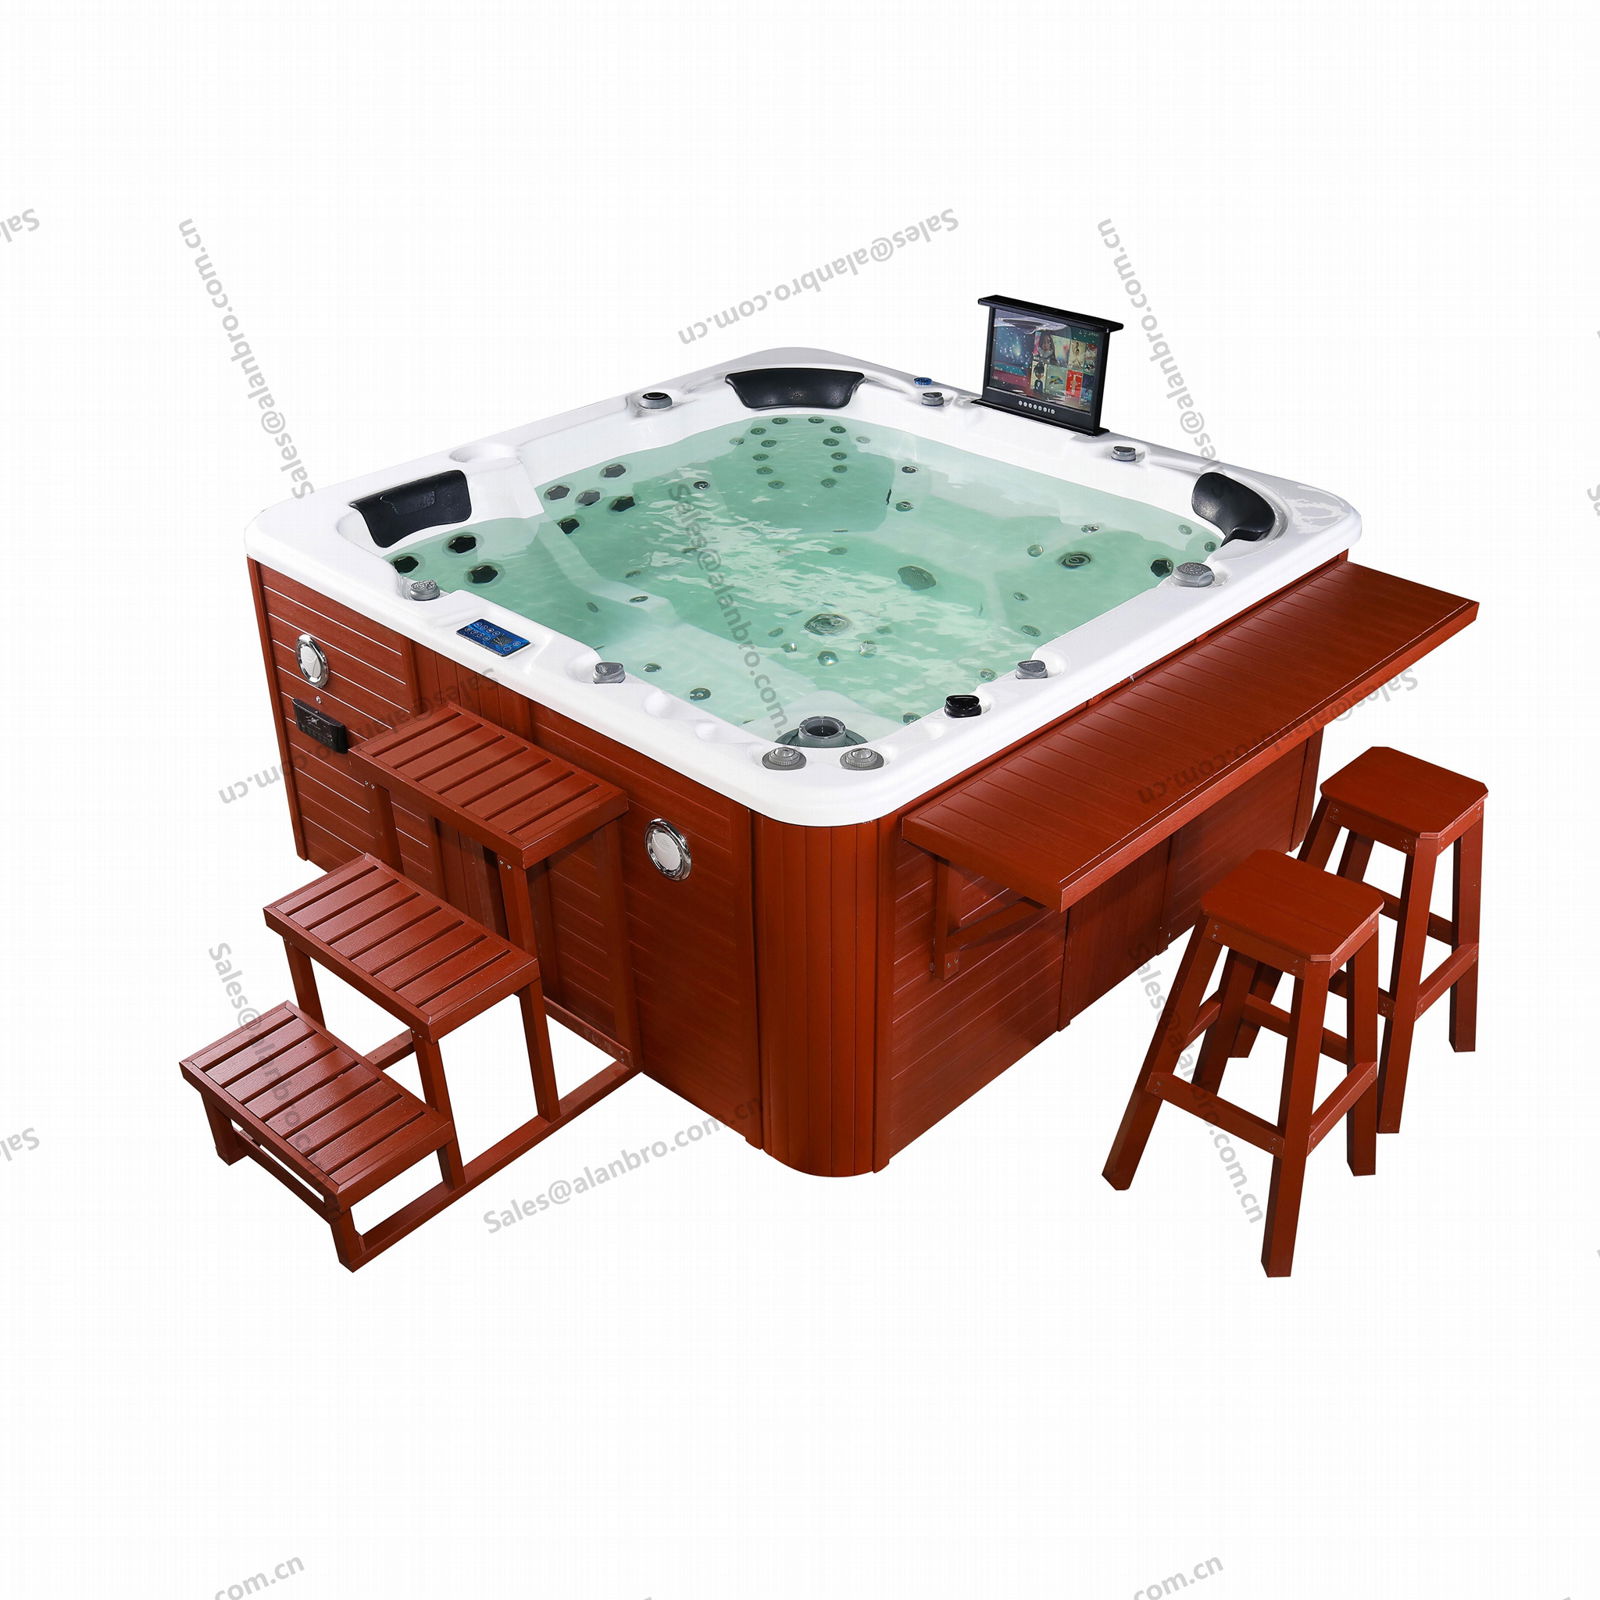 6 Person Deluxe Balboa System America Acrylic Hot Tub Outdoor